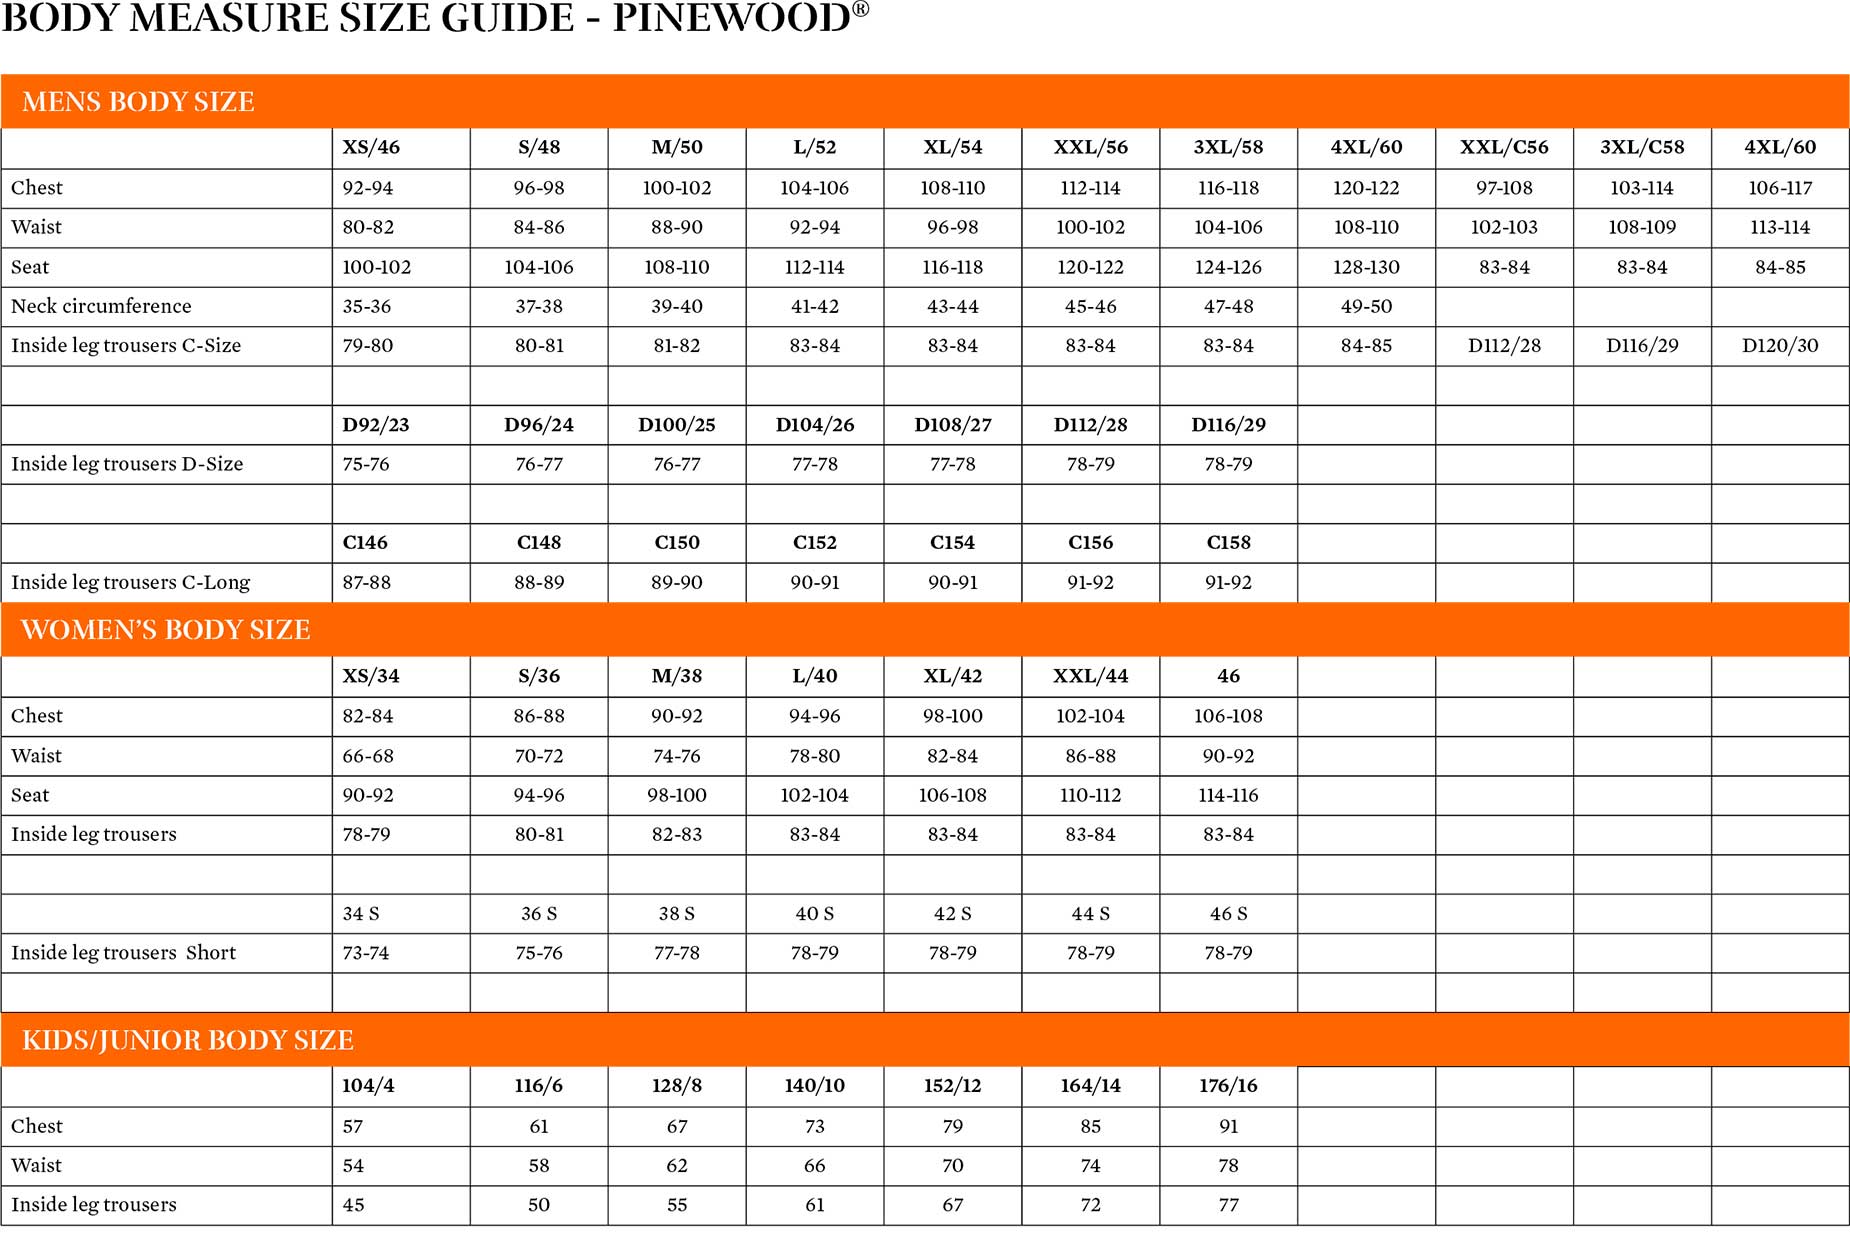 pinewood_body-measure-size-guide